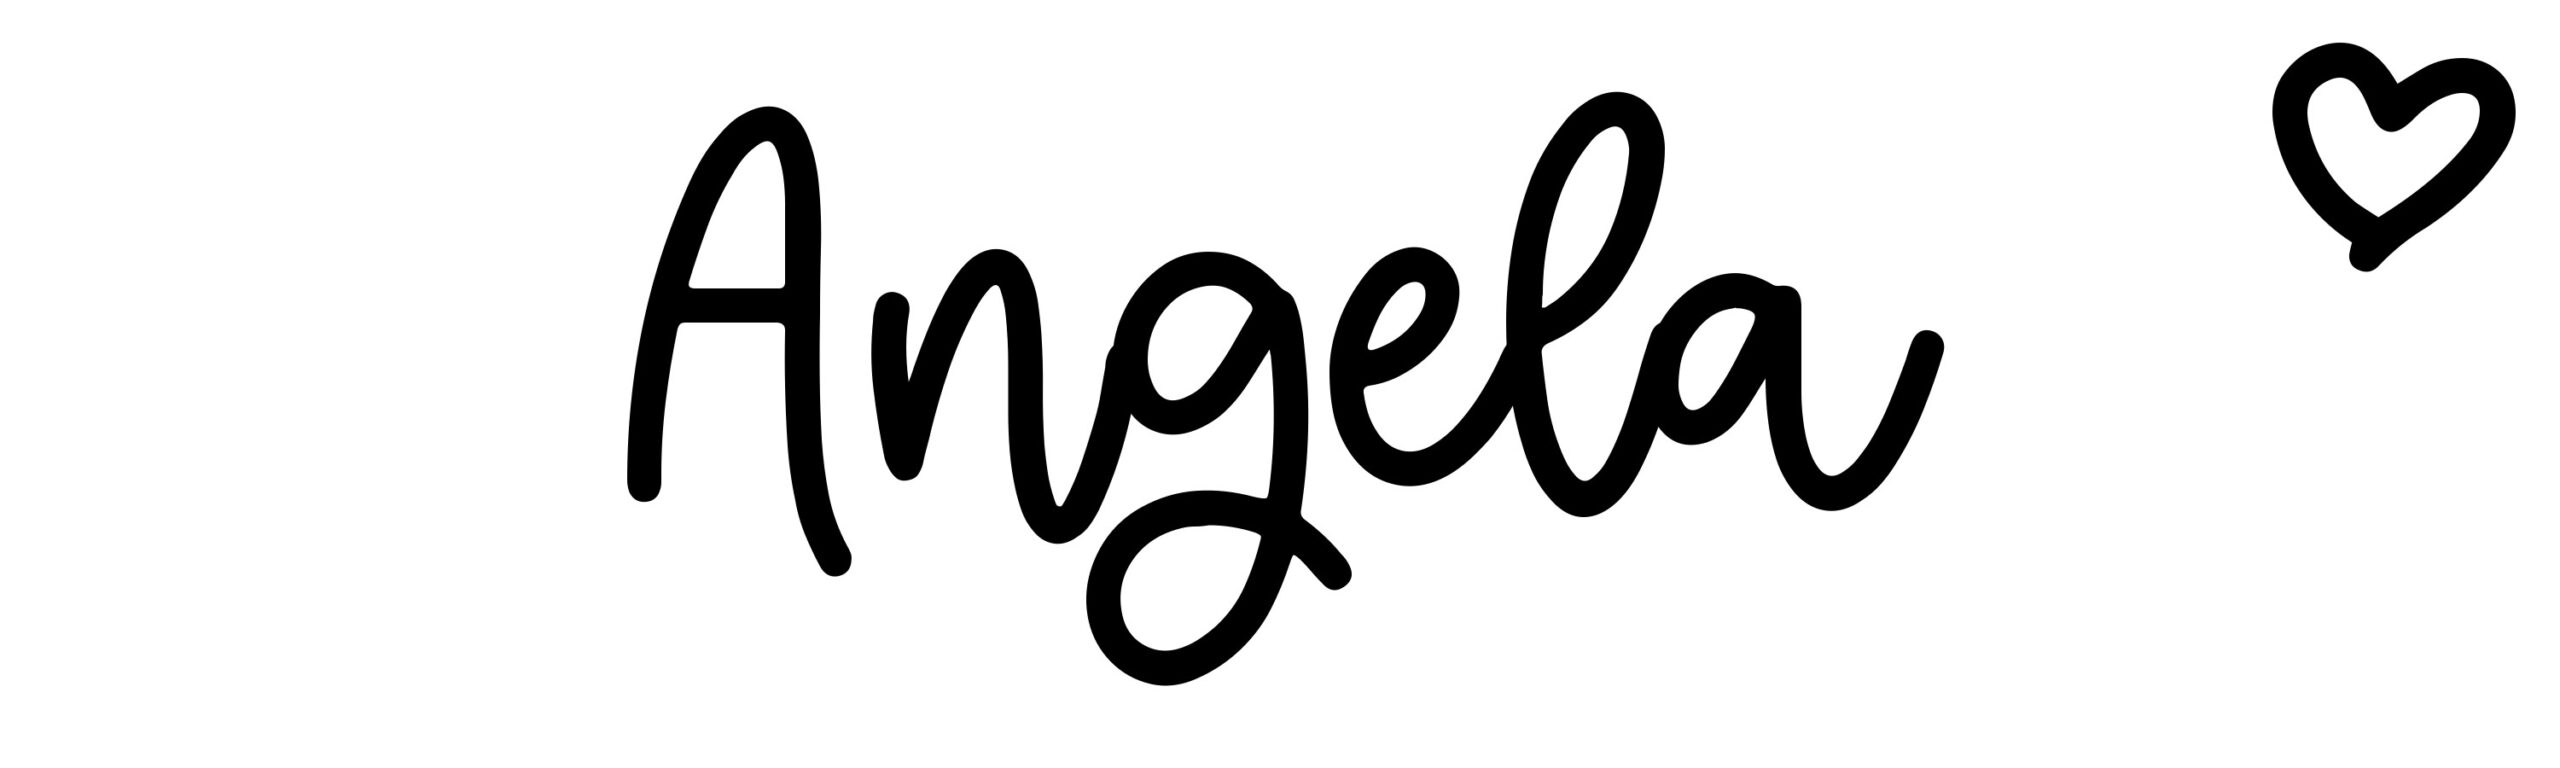 Angela - Name meaning, origin, variations and more